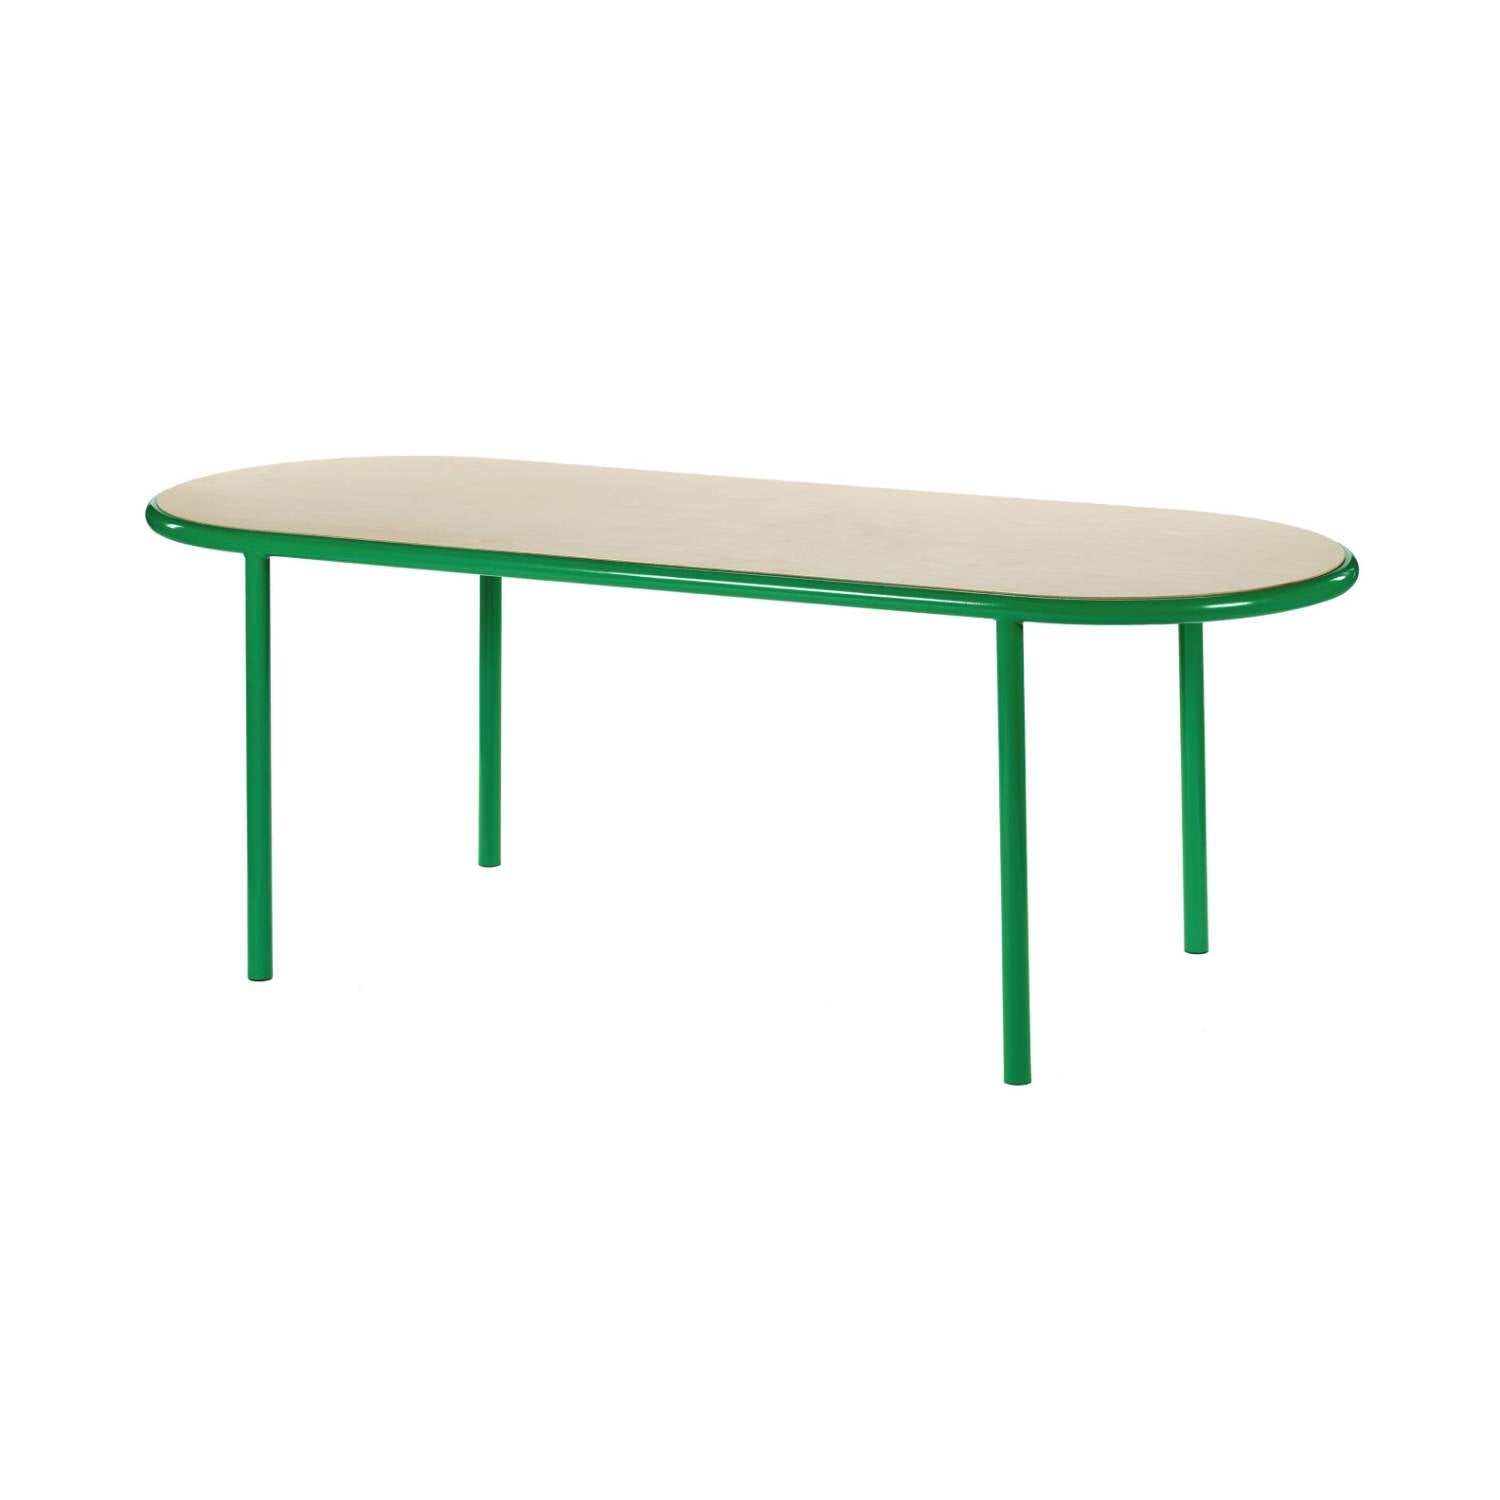 Wooden Table: Oval + Birch + Green